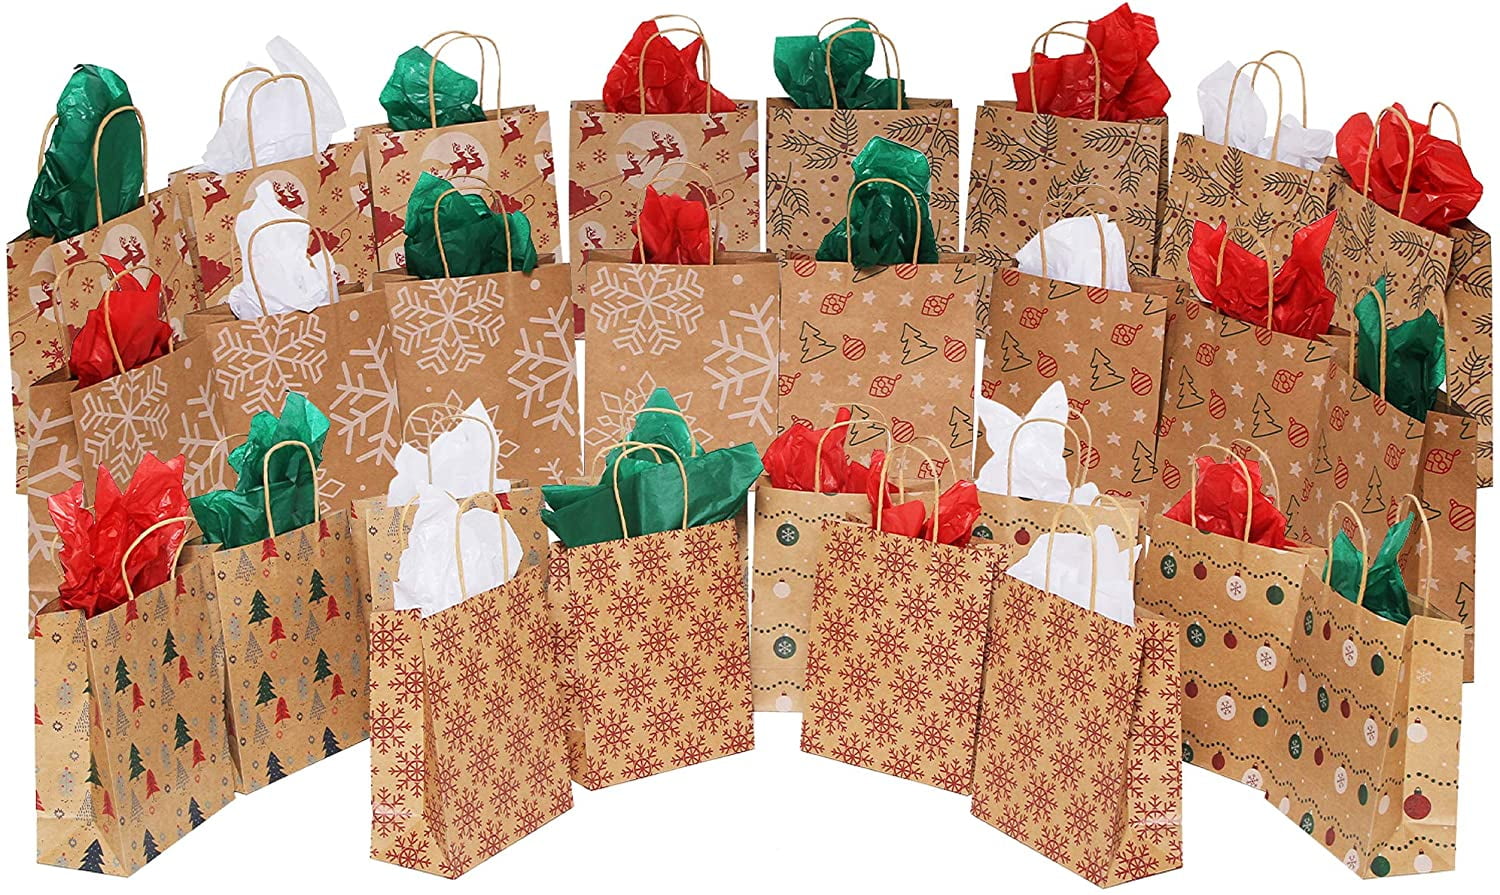 3 x Man Classic Luxury Gift Bags Decorative Strong Glitter Paper Xmas Present 